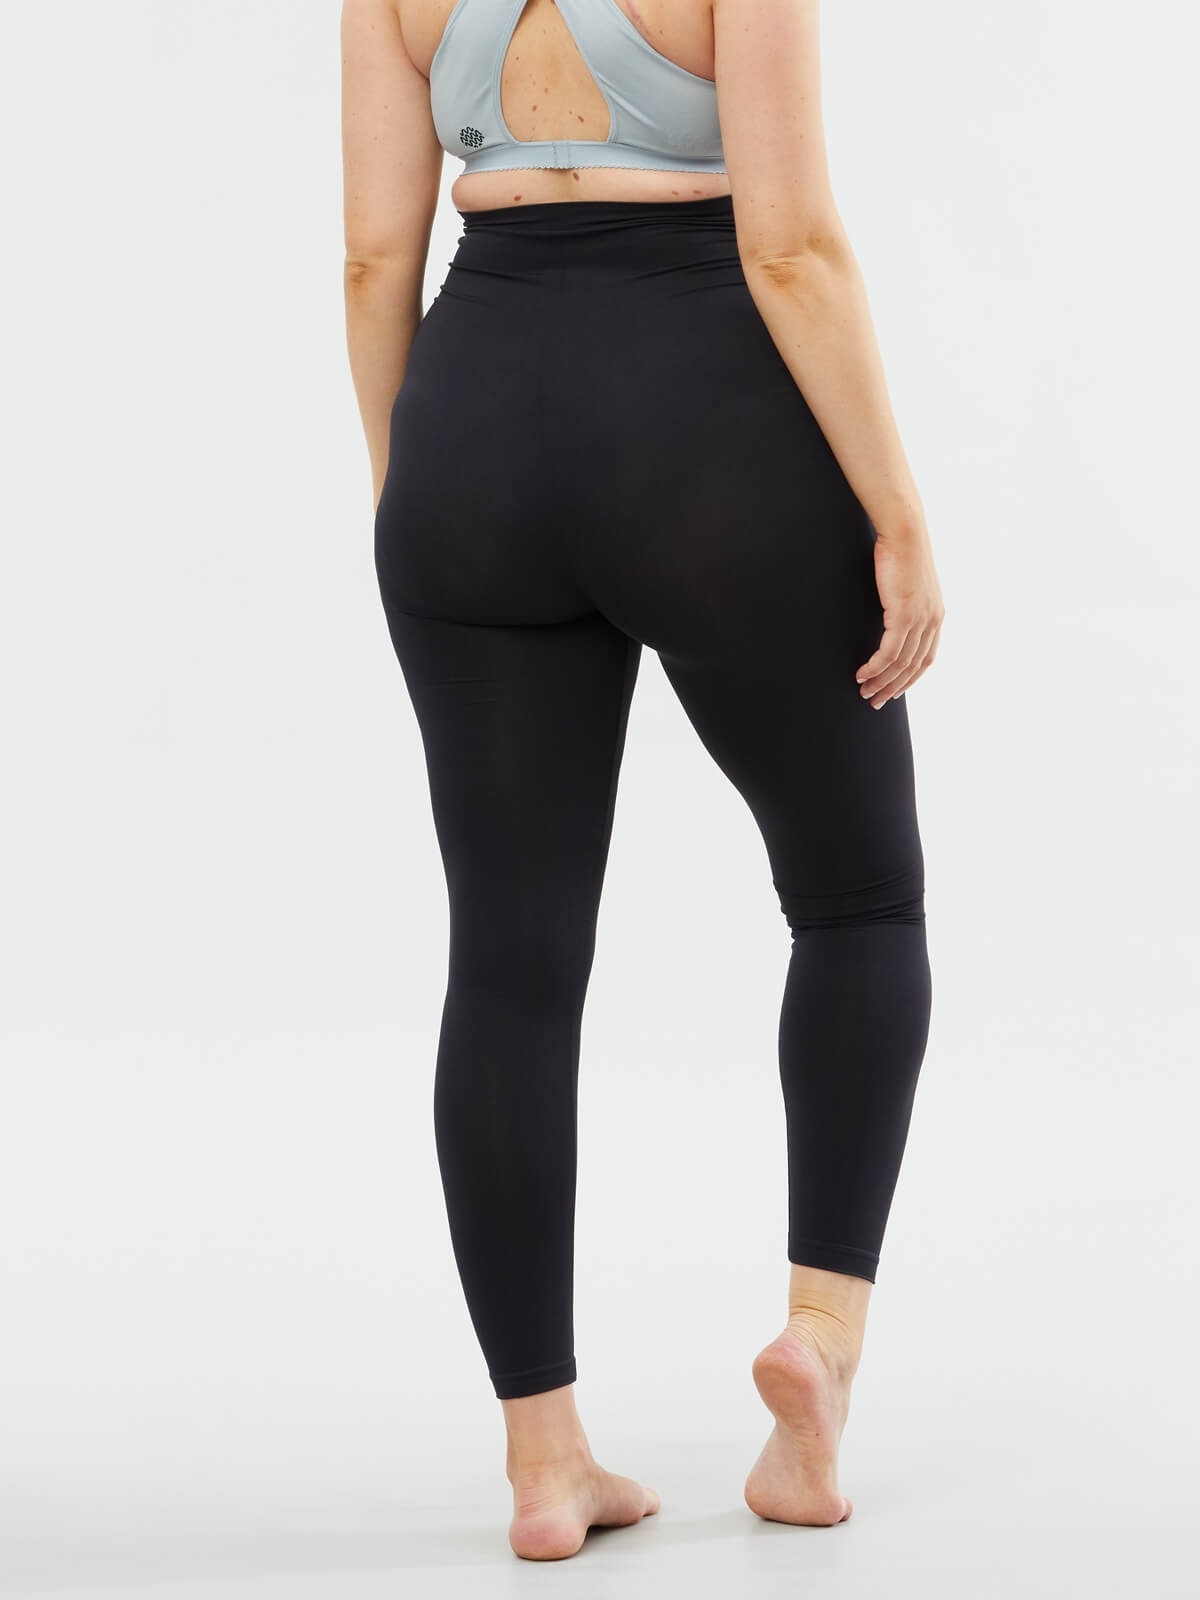 Butter Recycled Pregnancy Leggings